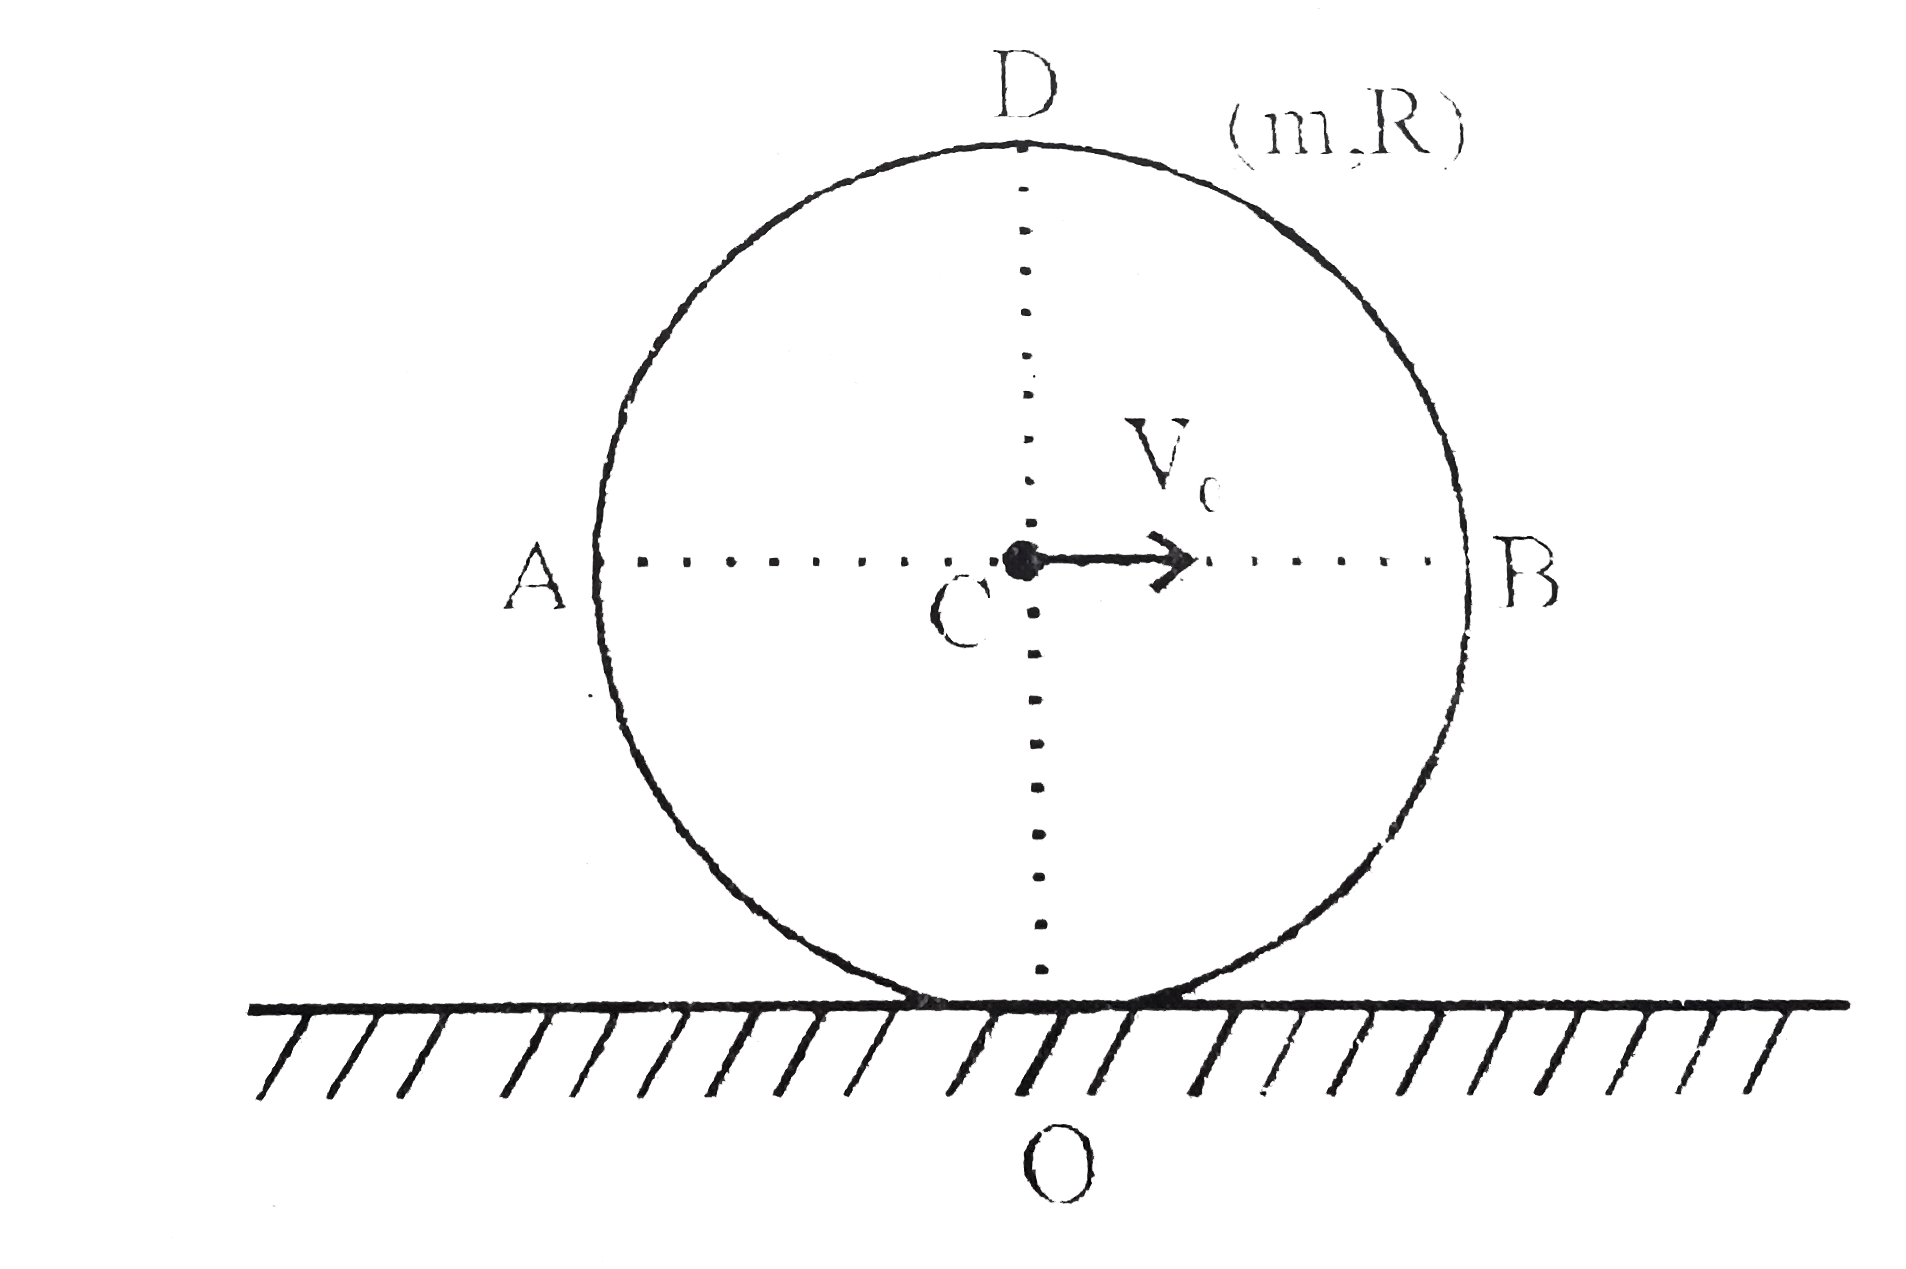 A uniform ring of mass m and radius R is performing pure rolling motion on a horizontal surface. The velocity of centre of the ring is V(0). If at the given instant the kinetic energy of the semi circular are AOB is lambda mv(0)(2),  then find the value of 11lambda (